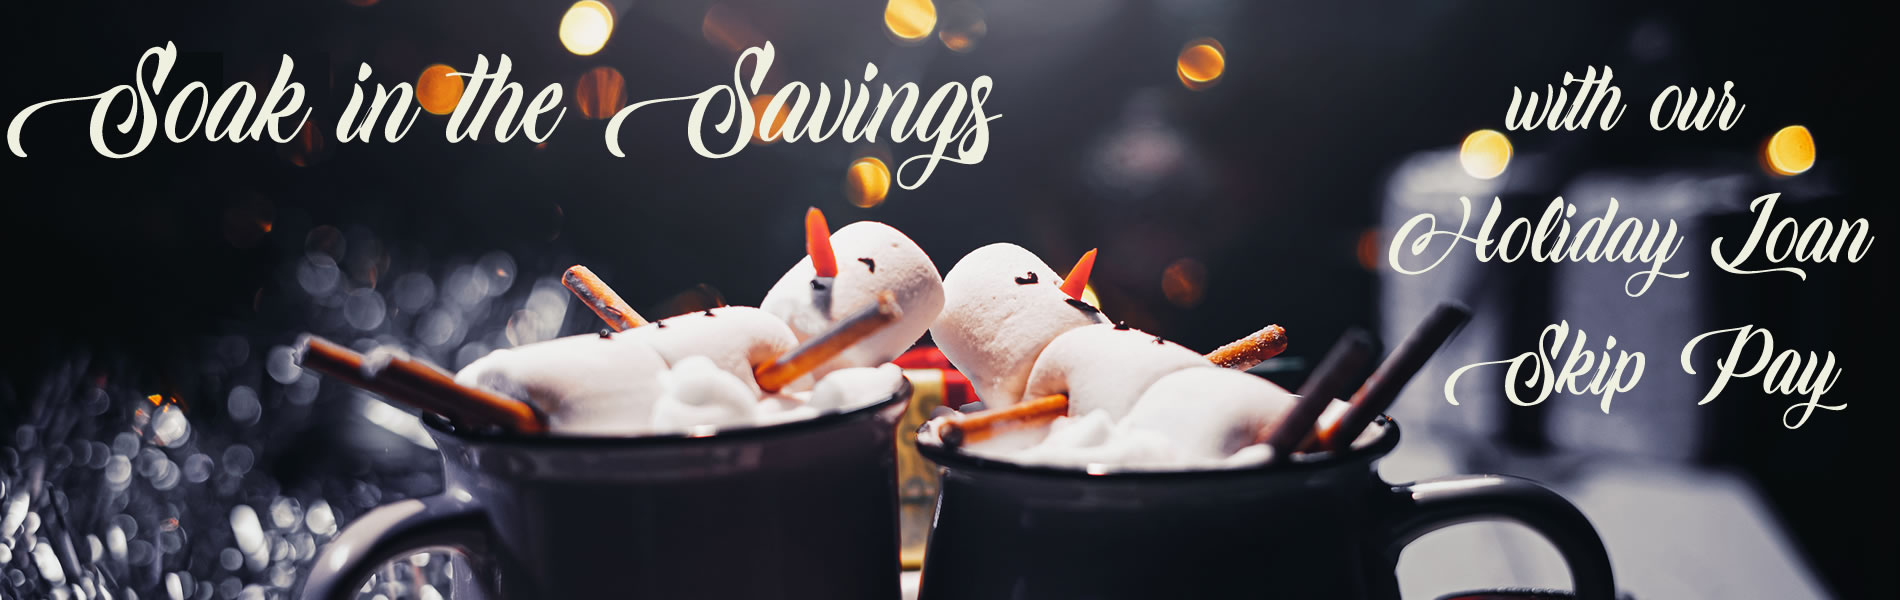 Soak in the savings with our loan skip pay